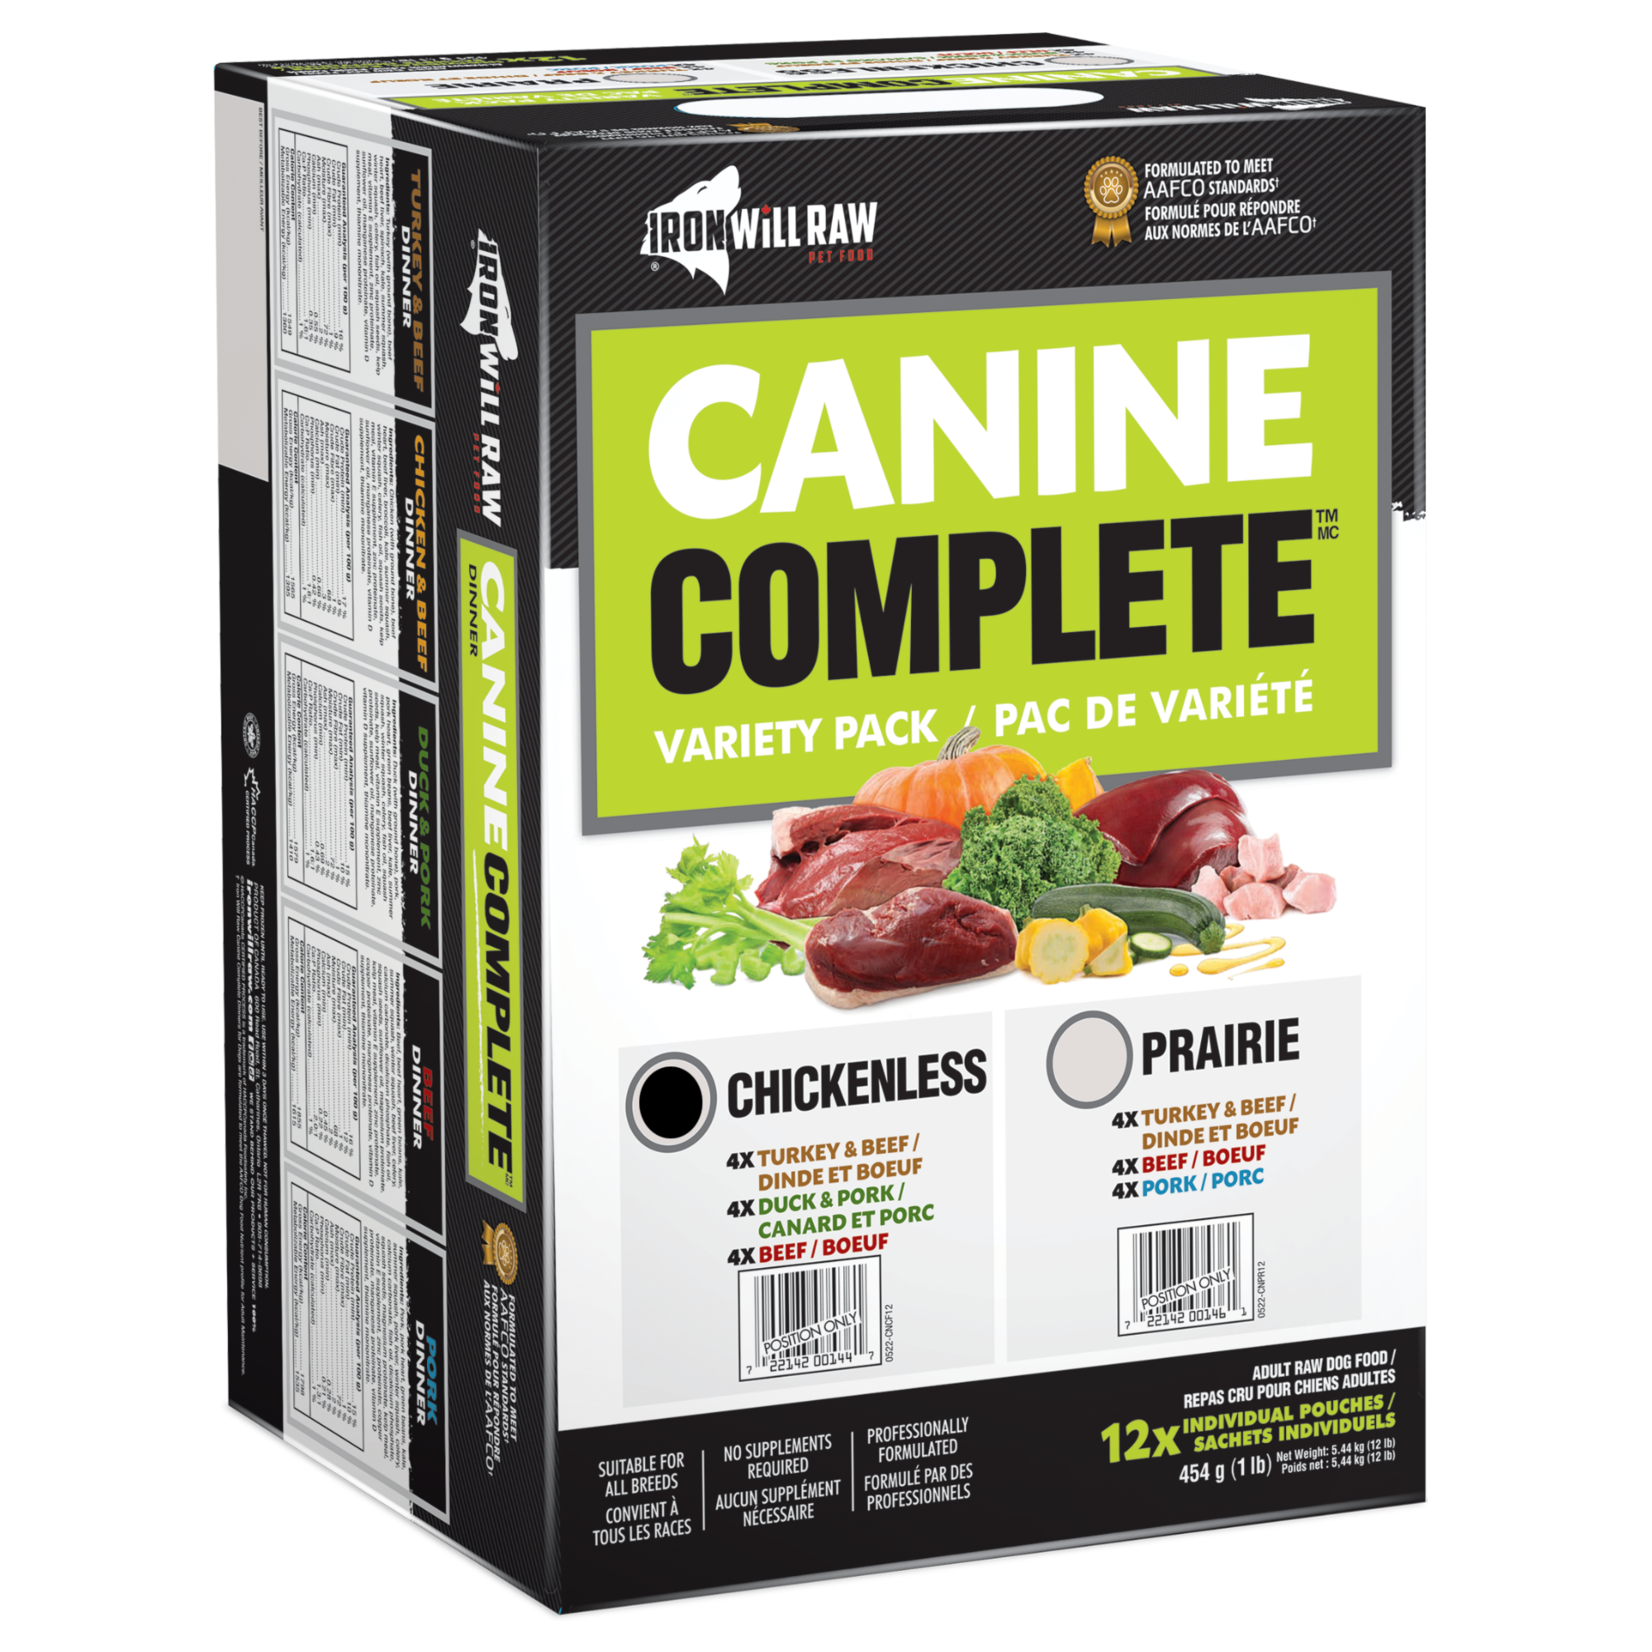 Iron Will Raw Iron Will Raw: Canine Complete: Chickenless Variety 12lb